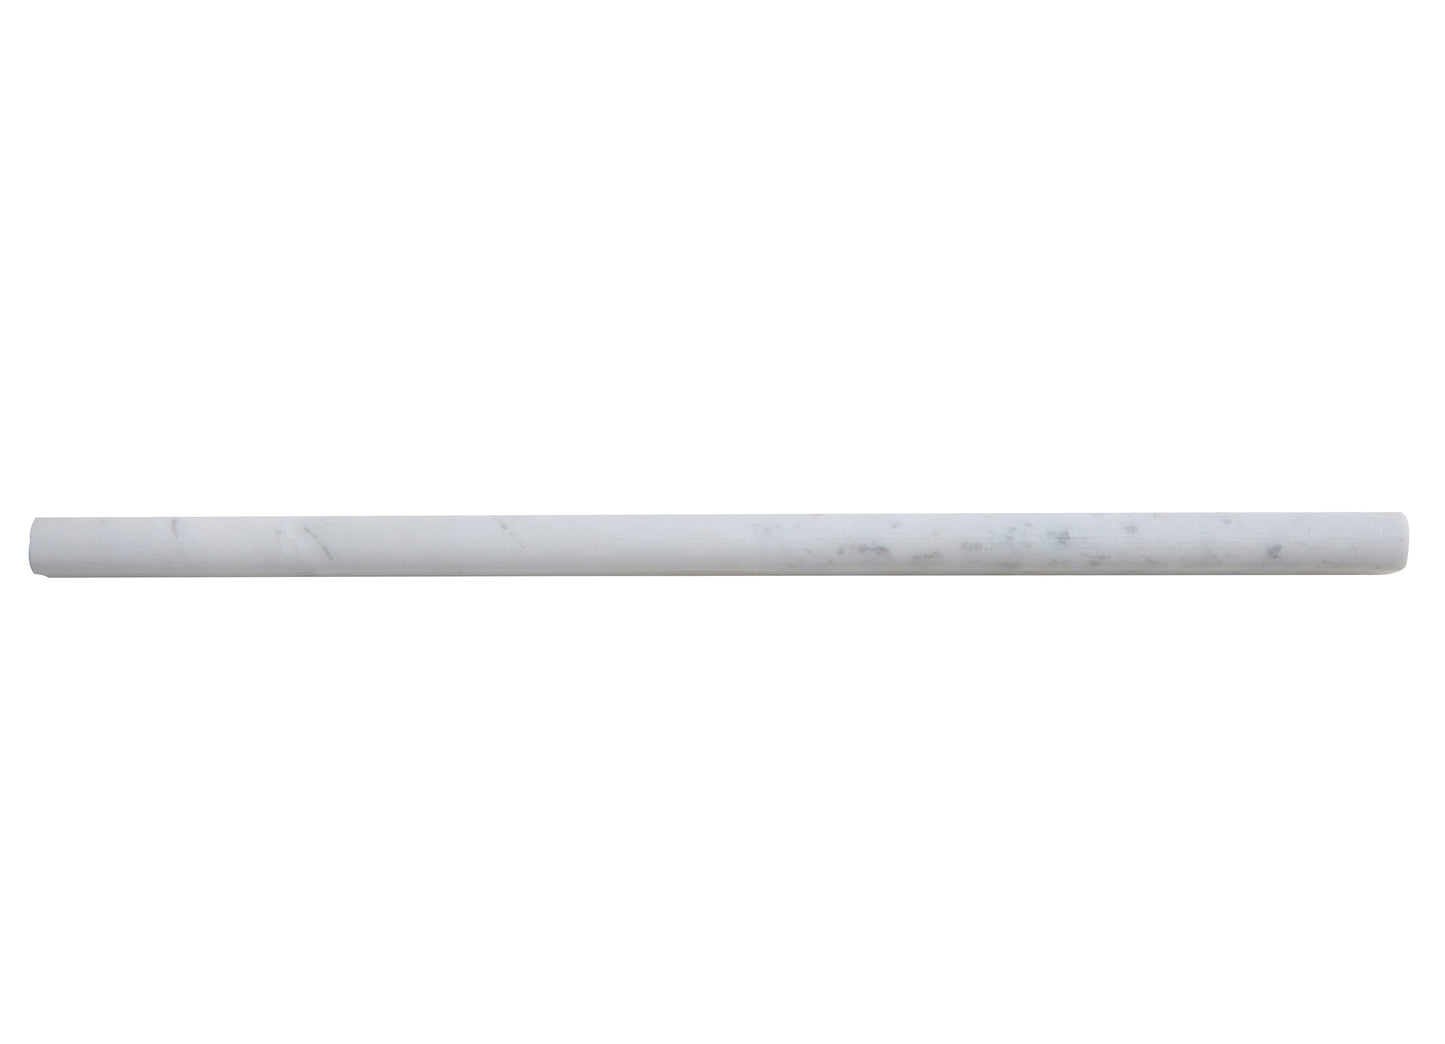 Valentino White Marble Molding Honed 1/2" x 12" Pencil Liner